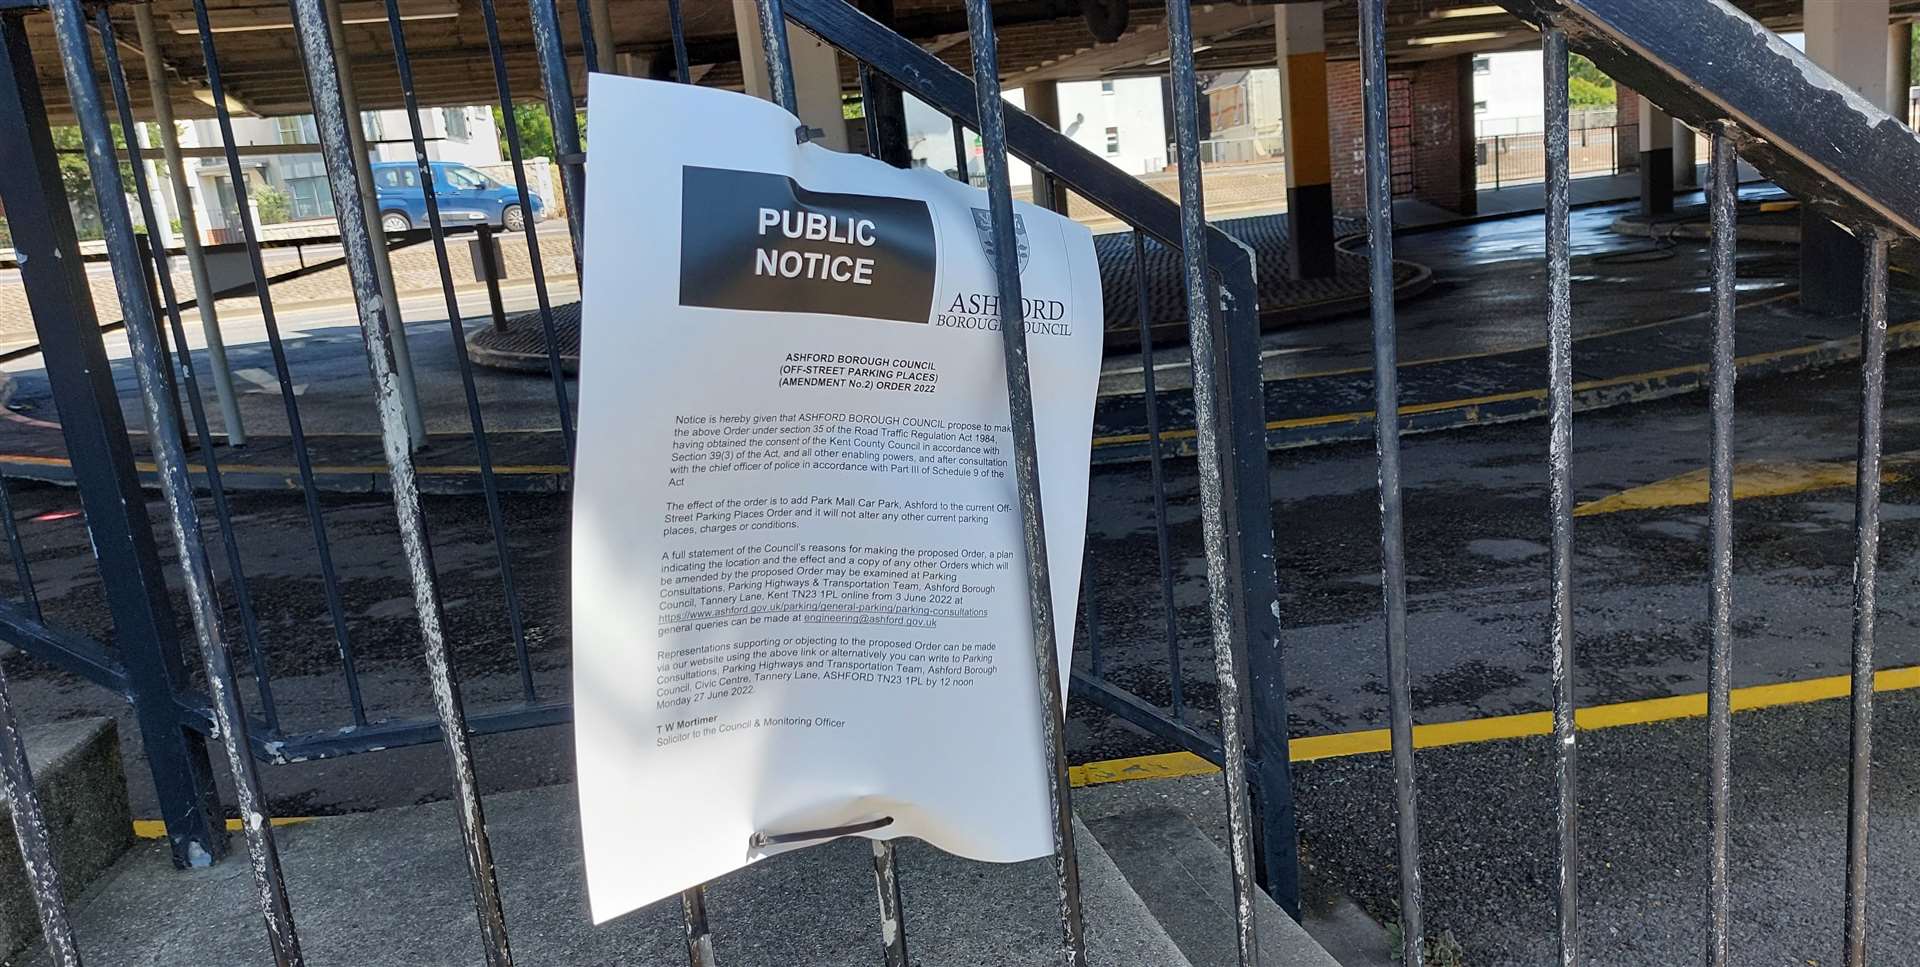 Public consultation notices have been put up around the car park